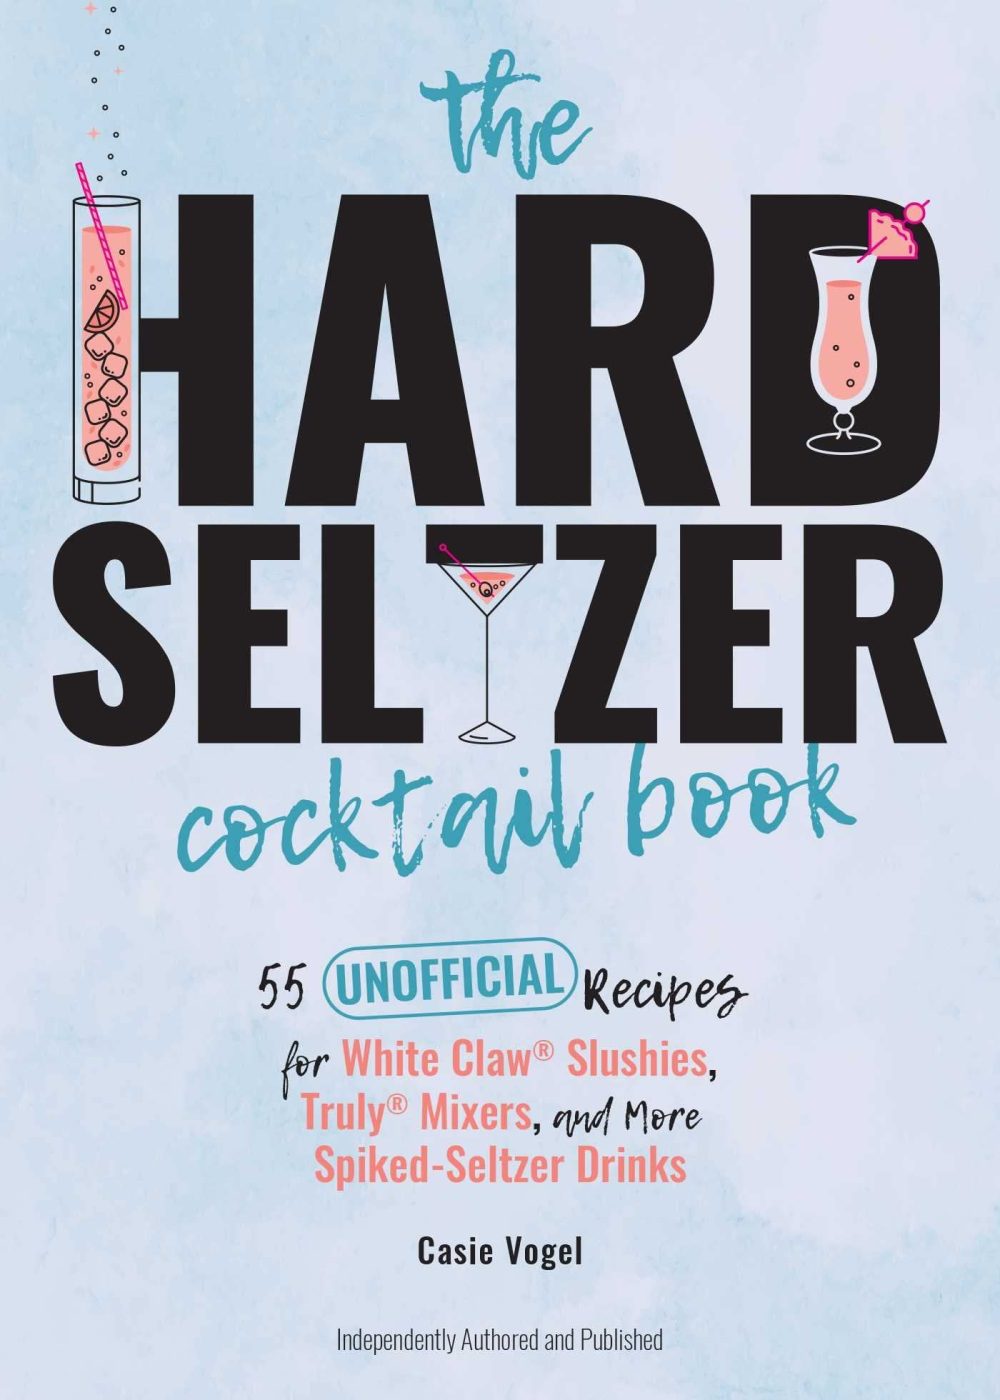 The Hard Seltzer Cocktail Book: 55 Unofficial Recipes for White Claw® Slushies, Truly® Mixers, and More